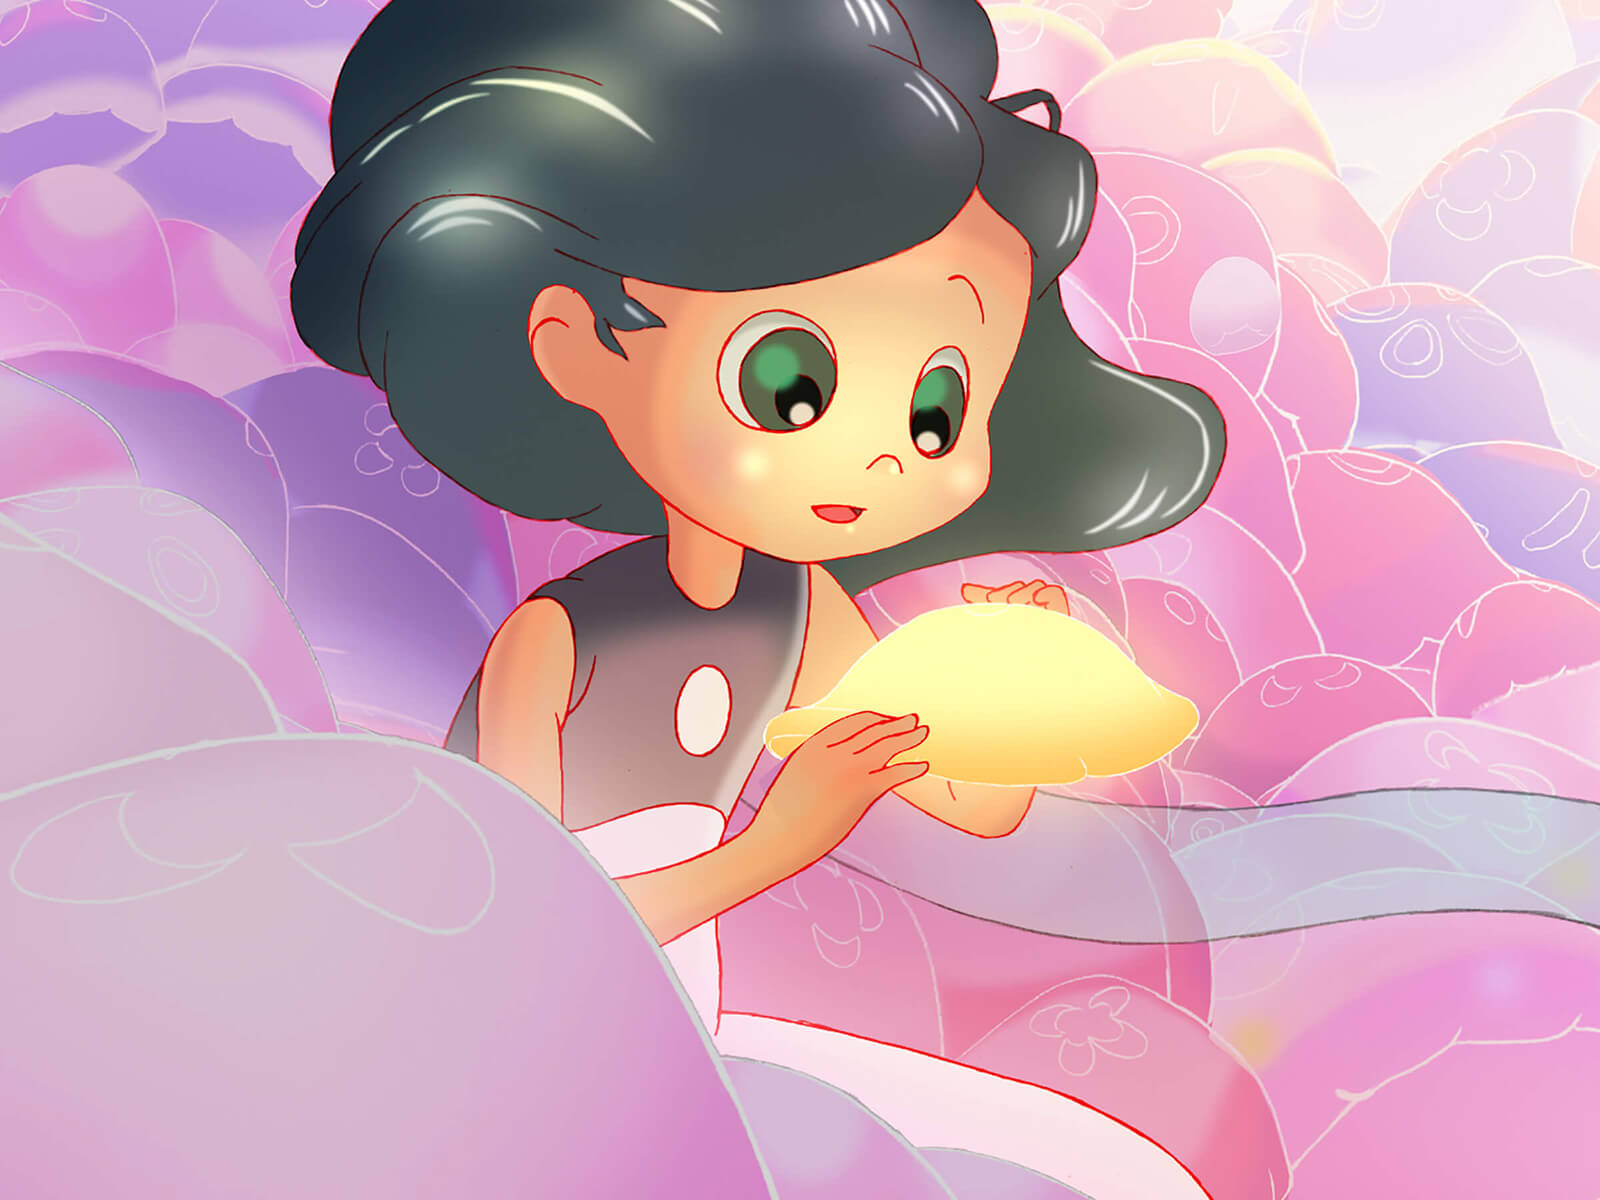 A girl with black hair and green eyes holds a yellow jellyfish in her hands, surrounded by pink, purple, and orange jellyfish